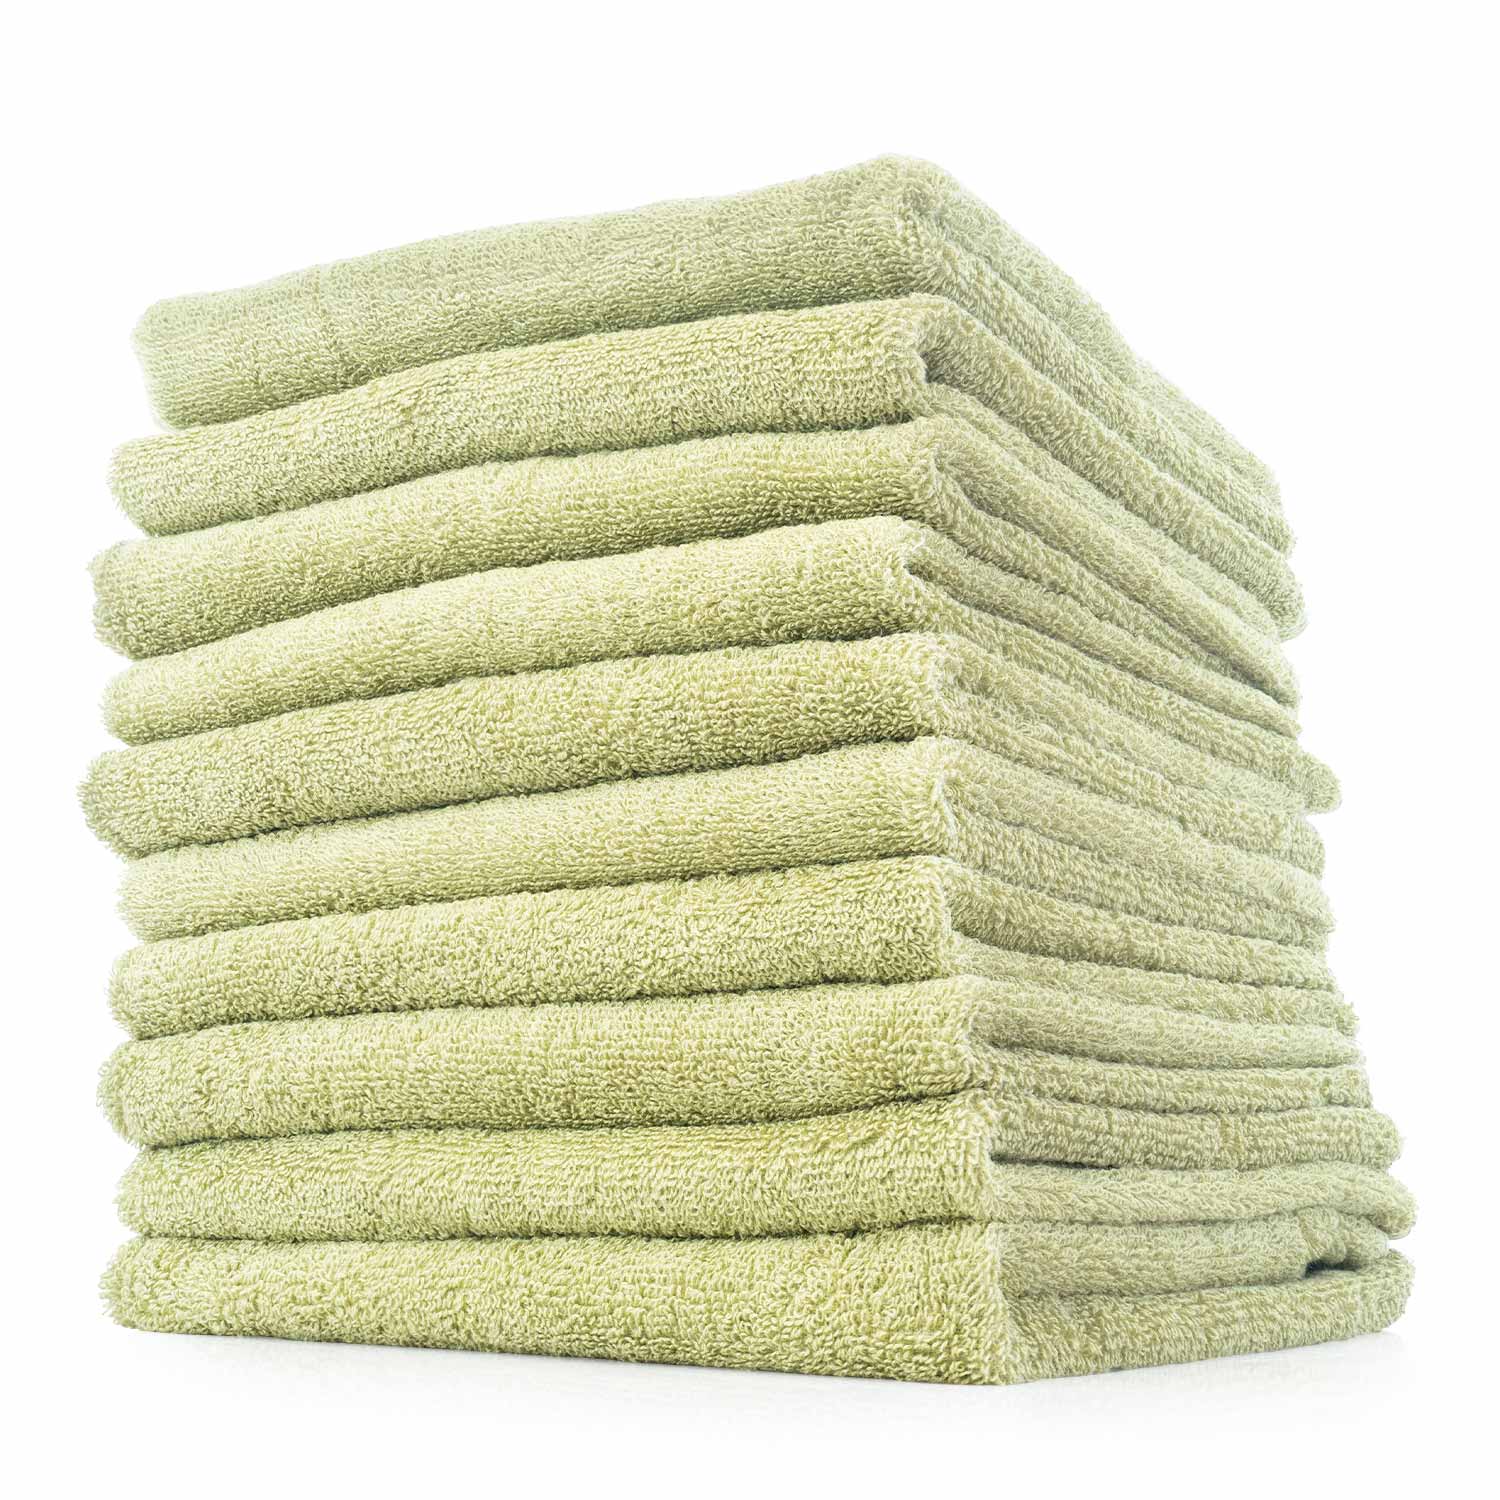 terry-towels